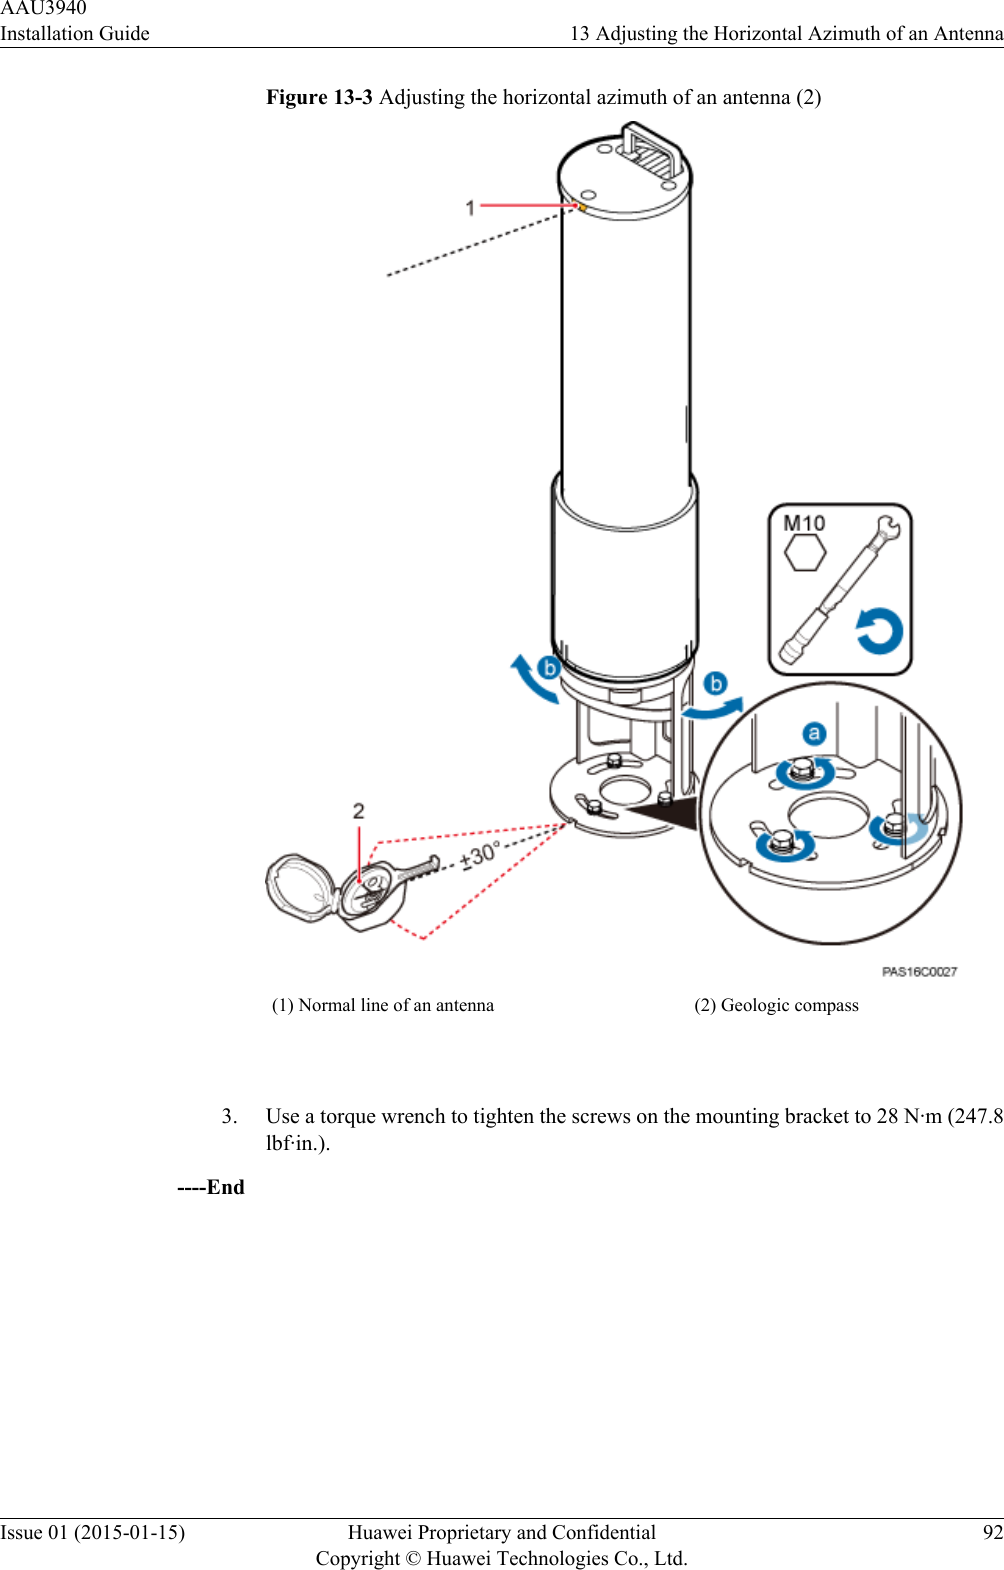 Figure 13-3 Adjusting the horizontal azimuth of an antenna (2)(1) Normal line of an antenna (2) Geologic compass 3. Use a torque wrench to tighten the screws on the mounting bracket to 28 N·m (247.8lbf·in.).----EndAAU3940Installation Guide 13 Adjusting the Horizontal Azimuth of an AntennaIssue 01 (2015-01-15) Huawei Proprietary and ConfidentialCopyright © Huawei Technologies Co., Ltd.92